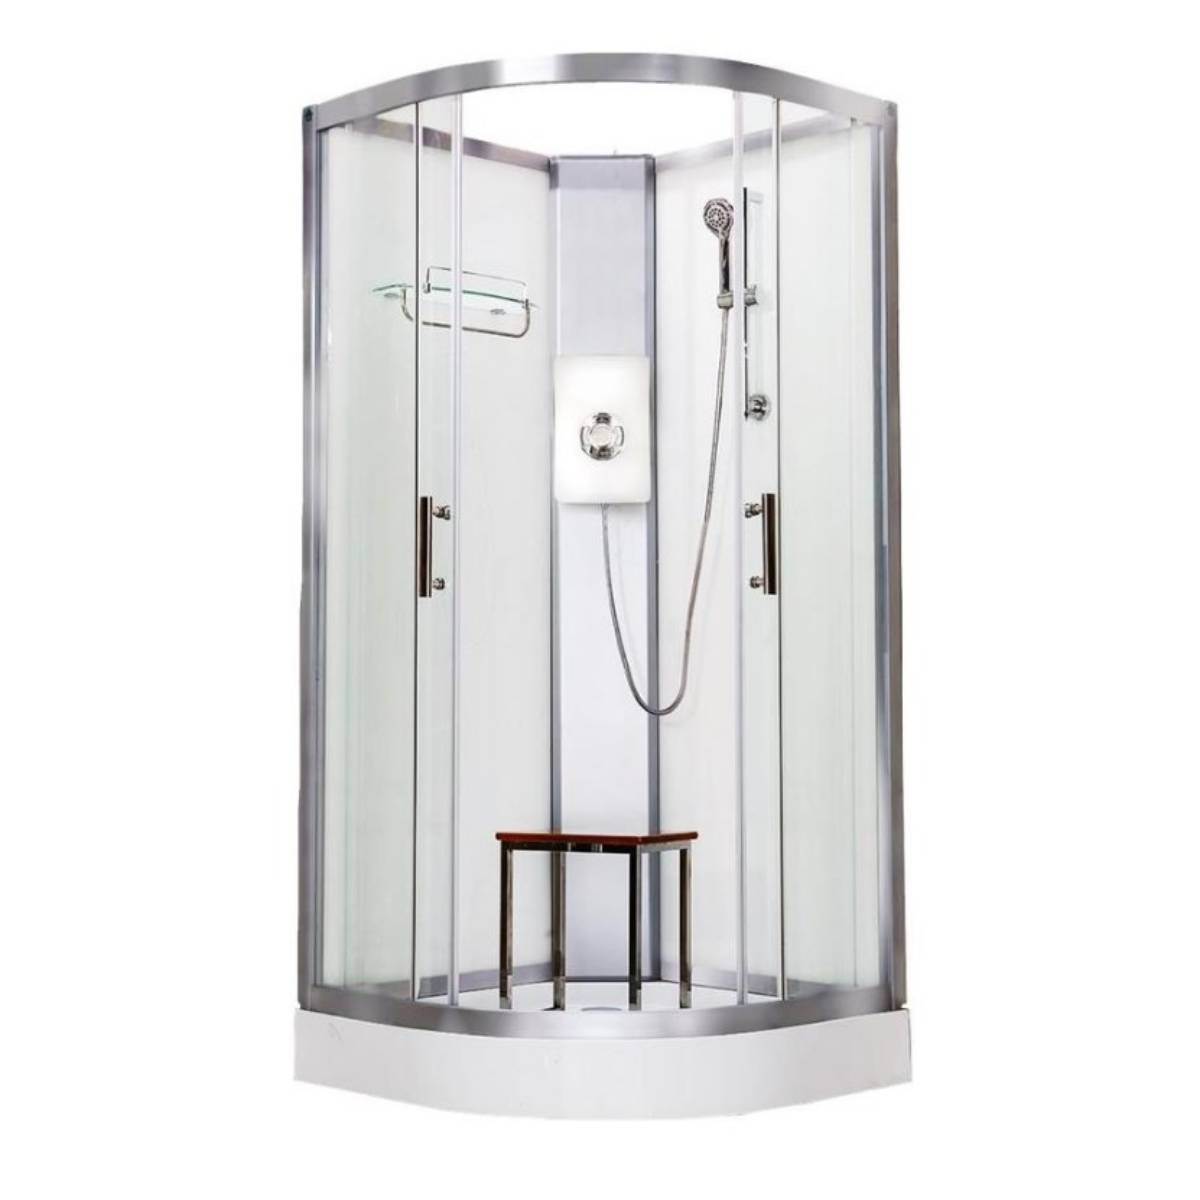 Vidalux Pure Electric 900mm Shower Cabin White - Lux White 9.5KW (11653)